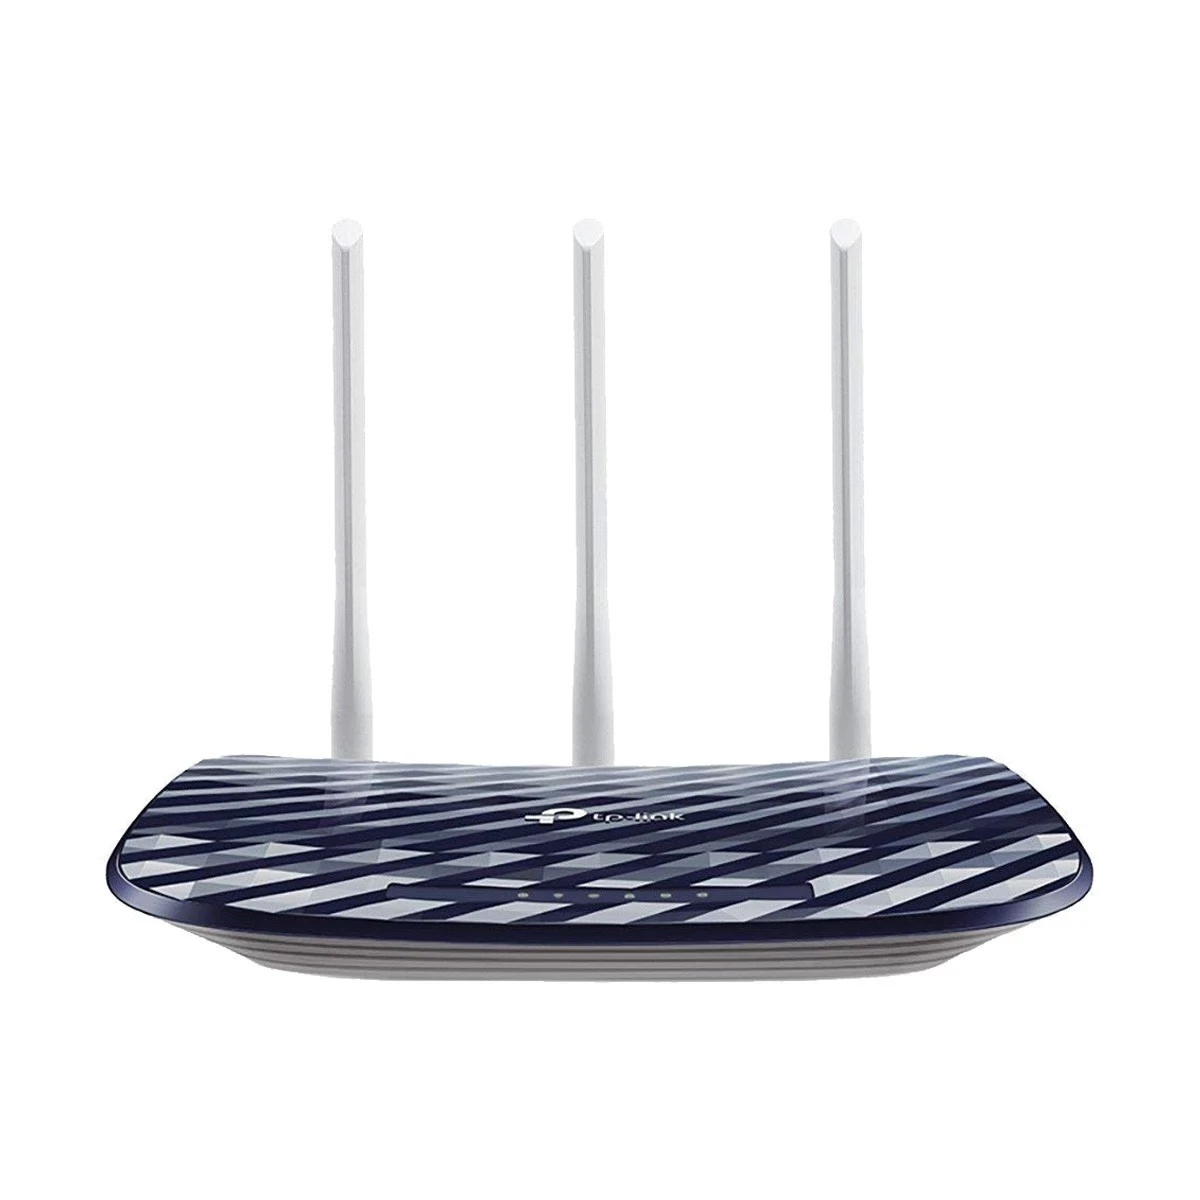 TP-Link Archer C20 AC750 Mbps Ethernet Dual-Band Wi-Fi Router